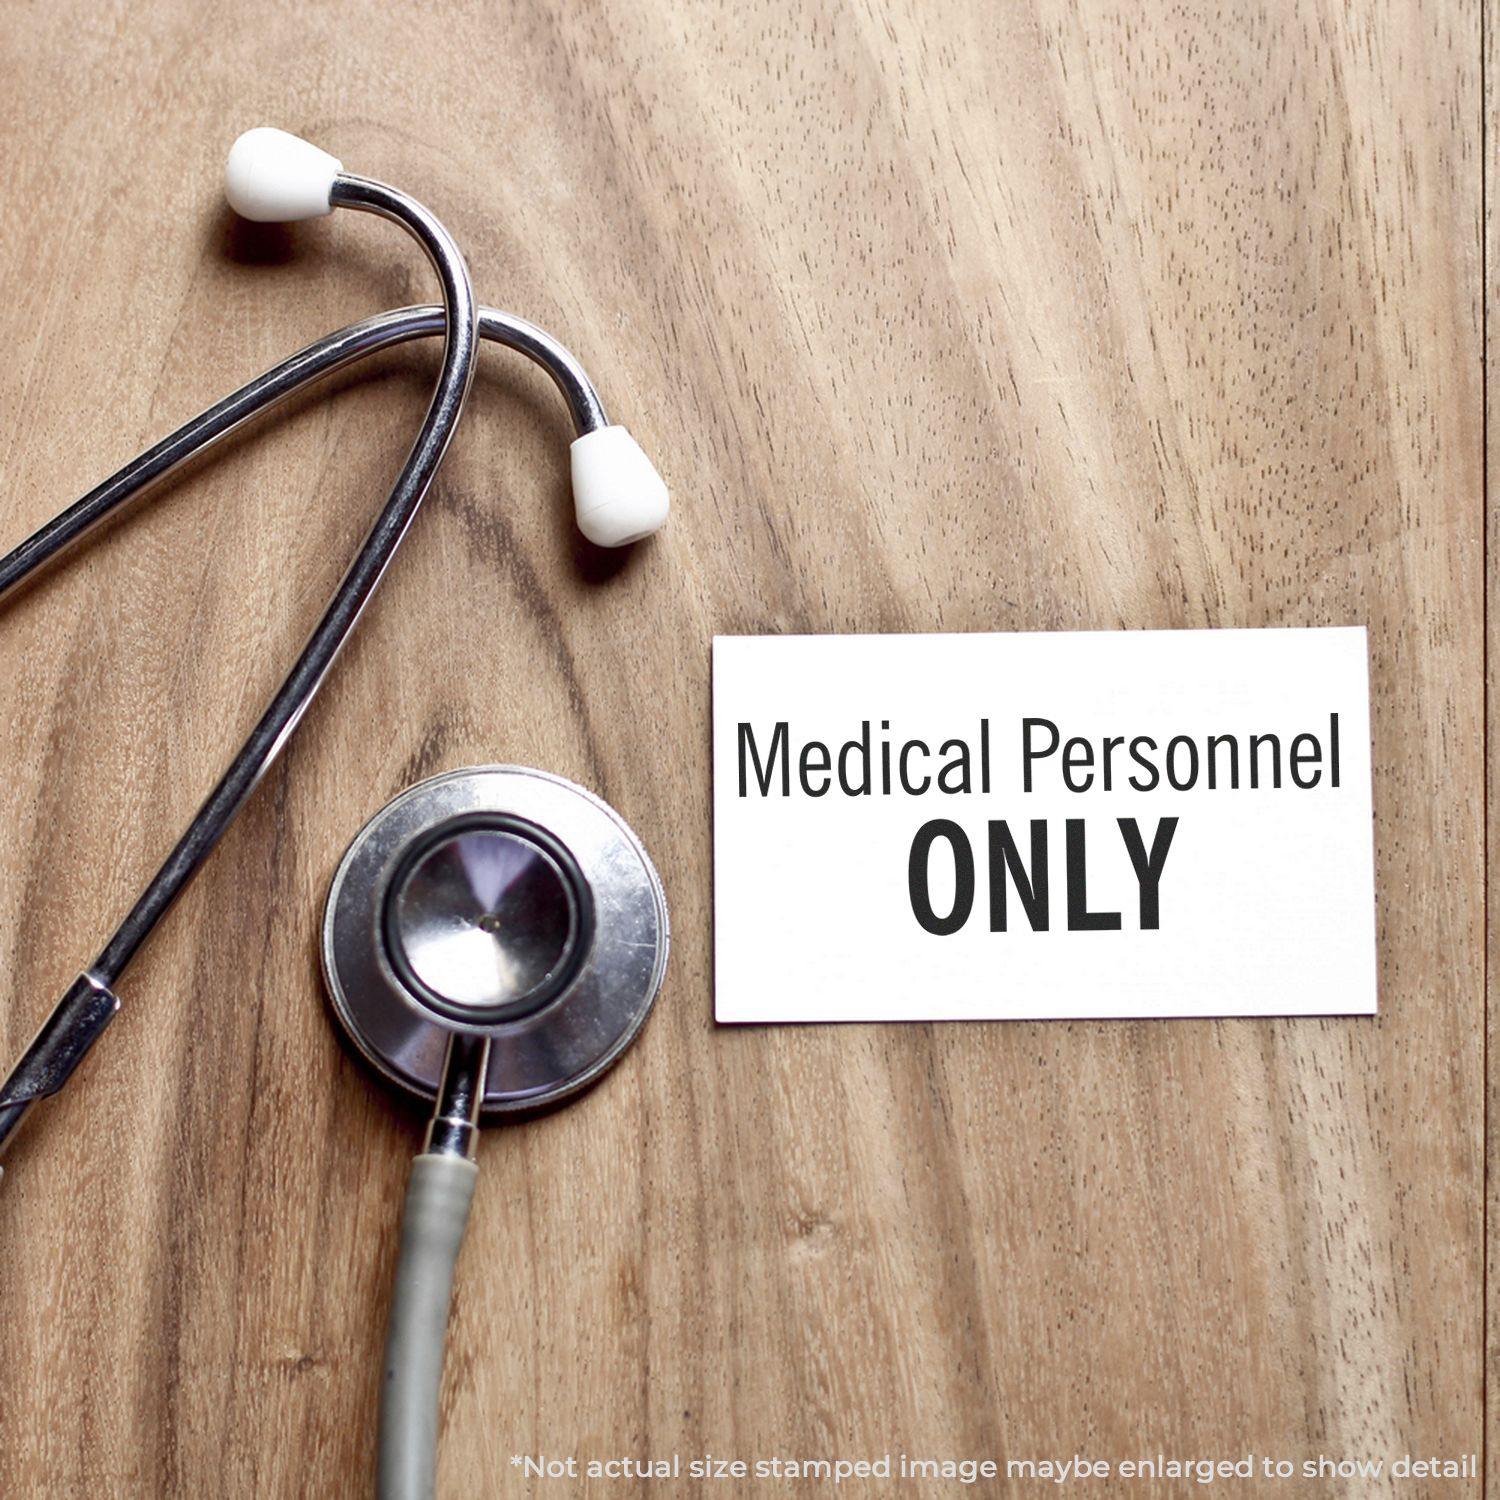 A stock office medical rubber stamp with a stamped image showing how the text "Medical Personnel ONLY" is displayed after stamping.